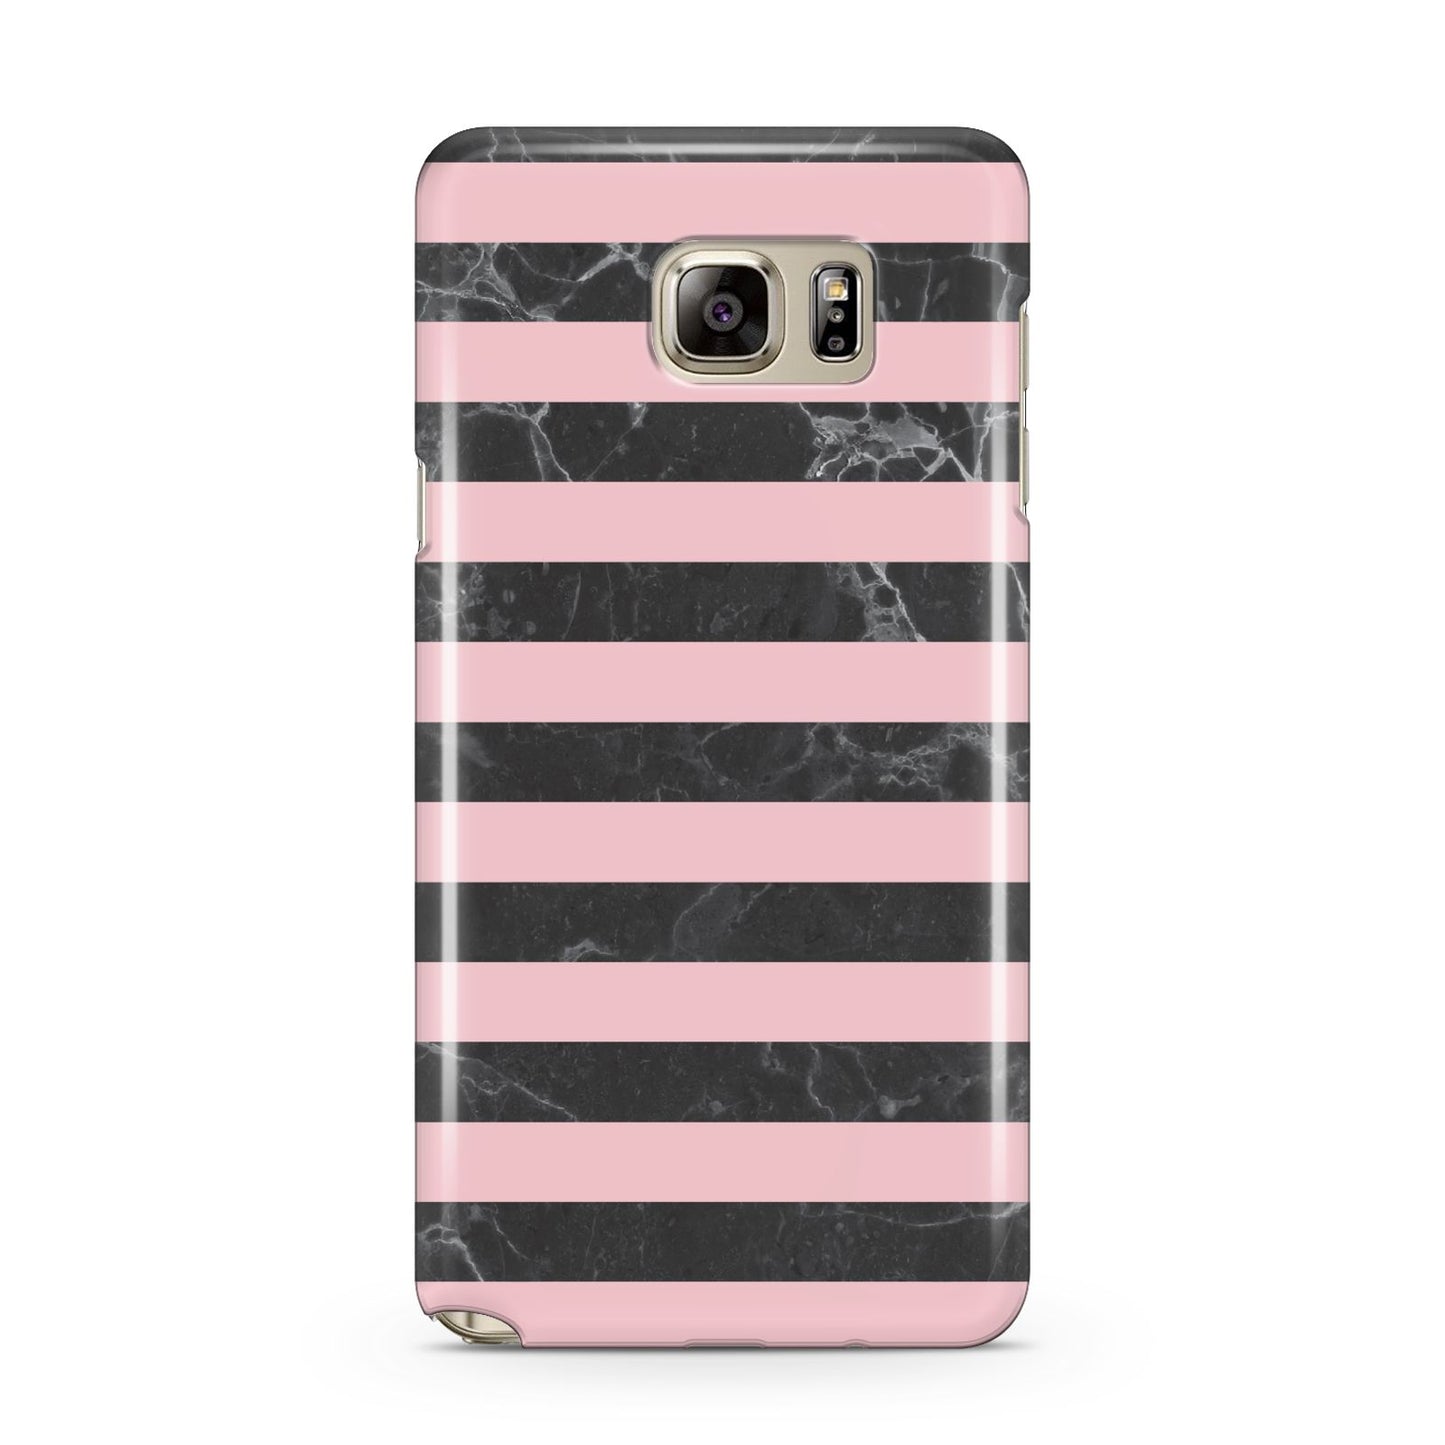 Marble Black Pink Striped Samsung Galaxy Note 5 Case